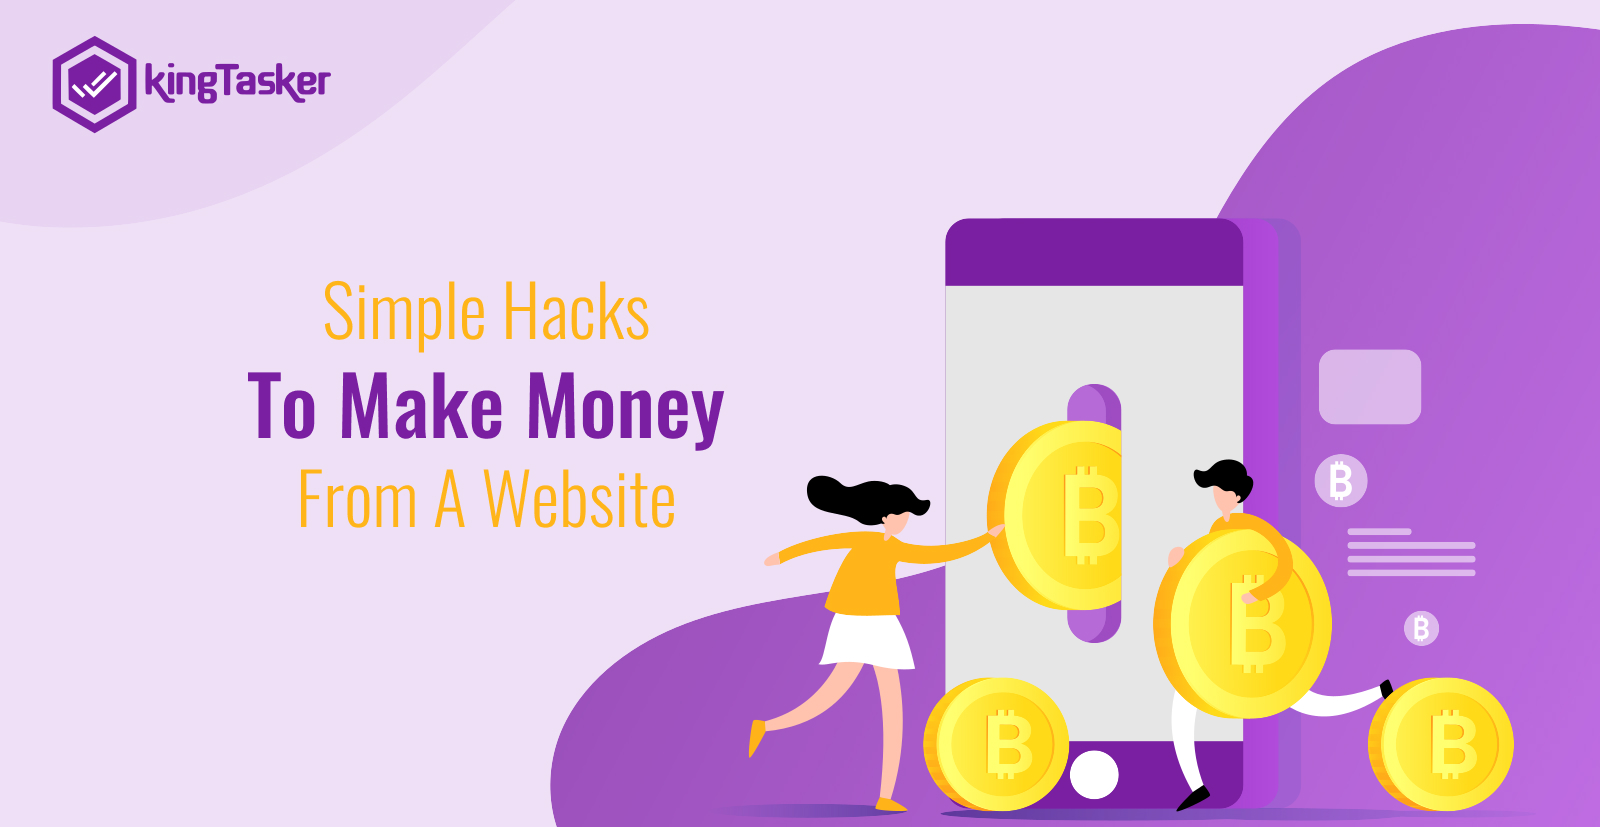 Simple Hacks To Make Money From a Website